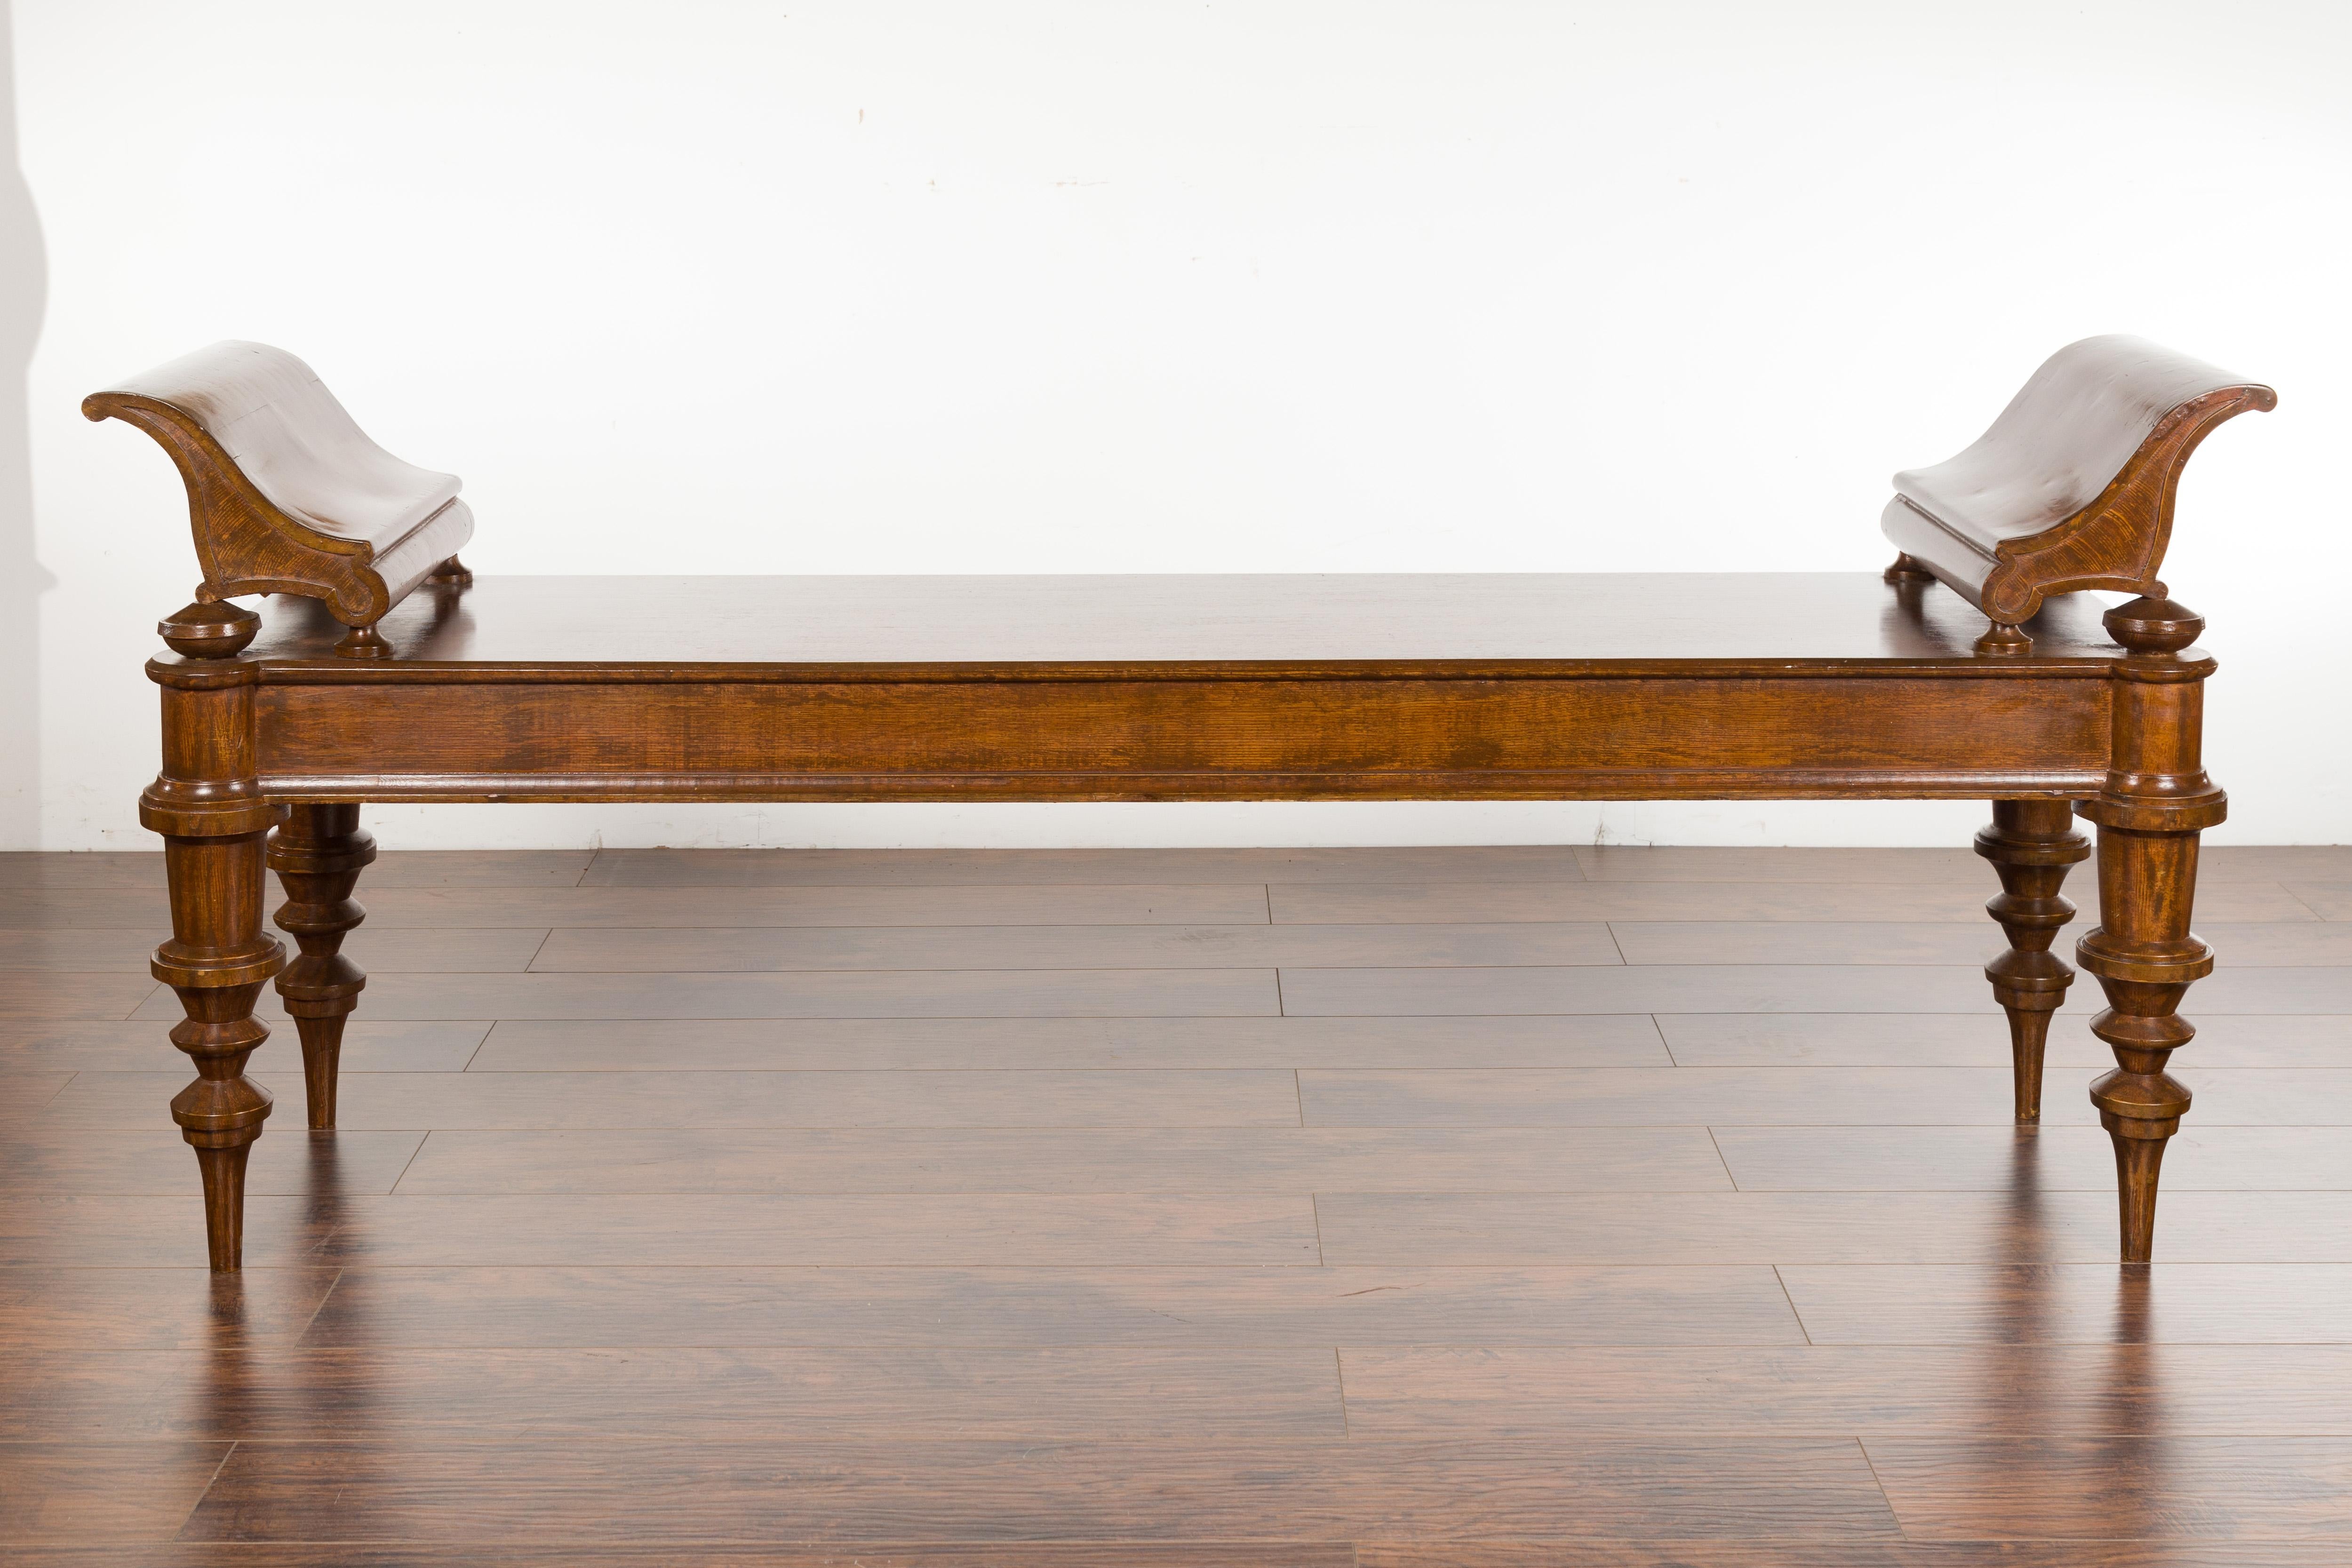 Massive English Mahogany Bench with Curving Arm Supports and Turned Legs 7